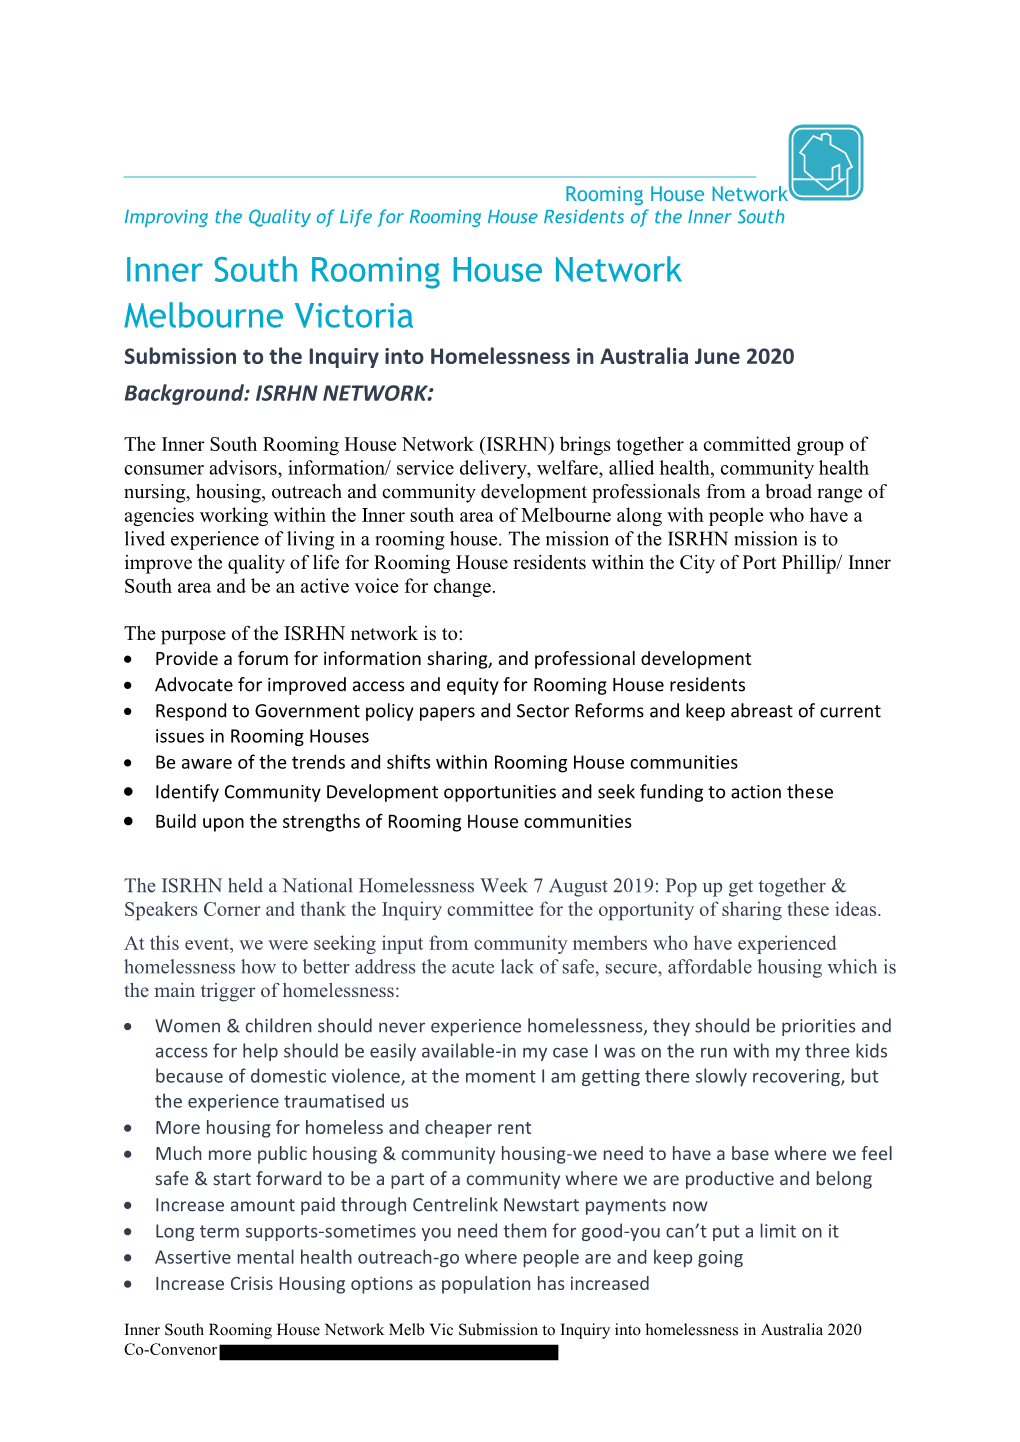 Inner South Rooming House Network Melbourne Victoria Submission to the Inquiry Into Homelessness in Australia June 2020 Background: ISRHN NETWORK